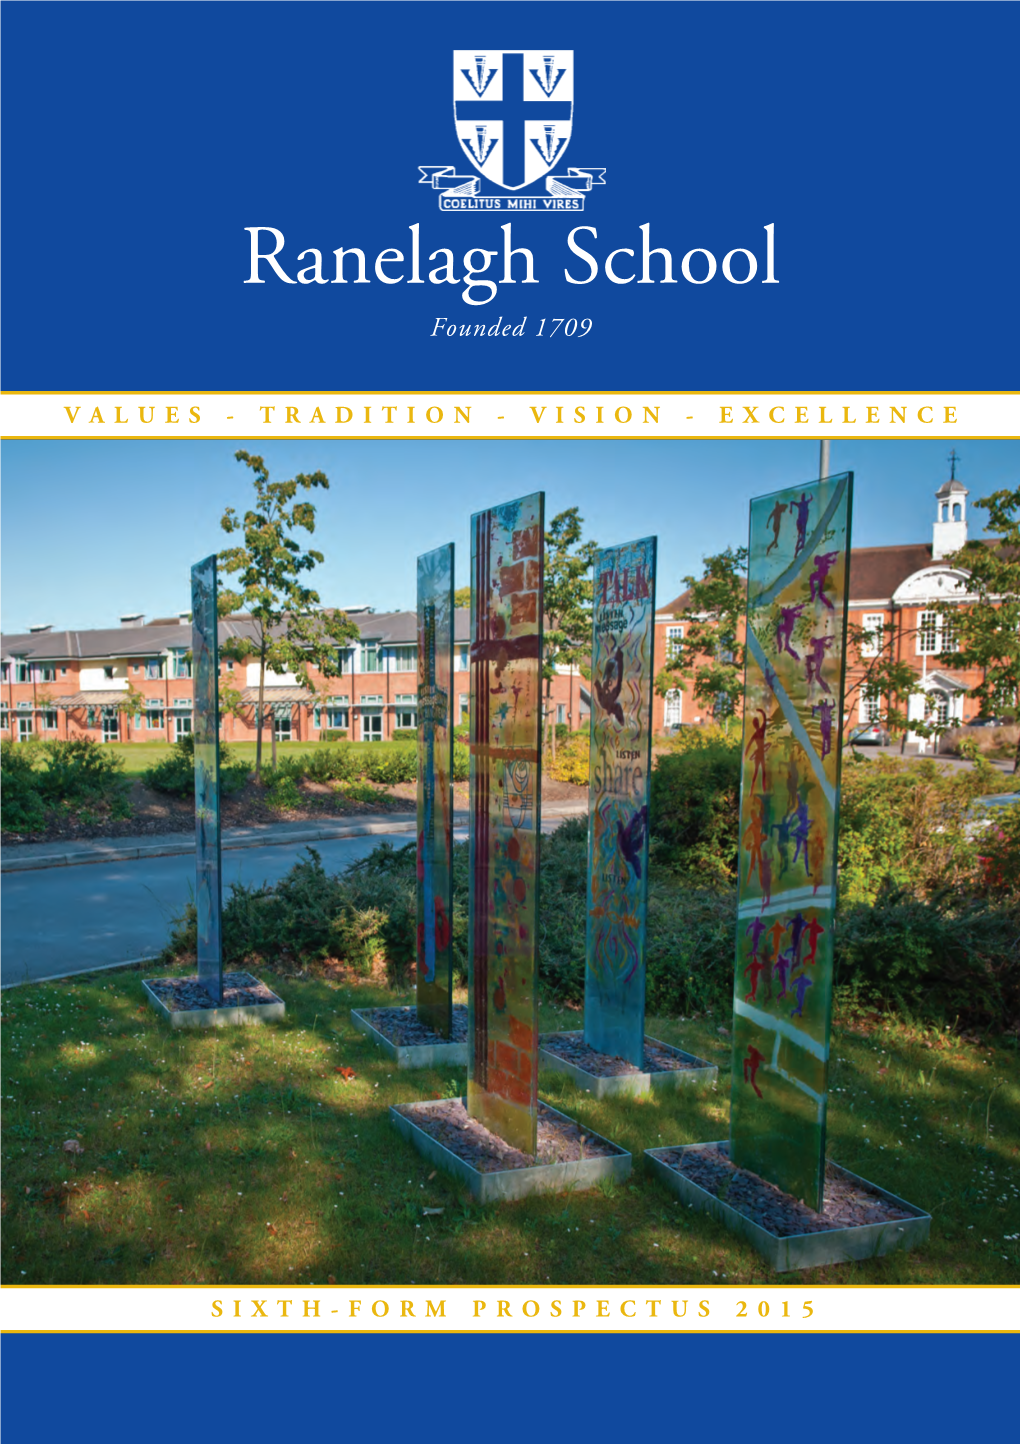 Ranelagh 6Th Form Prospectus 2015.Indd 1 17/11/2014 09:17 Notes